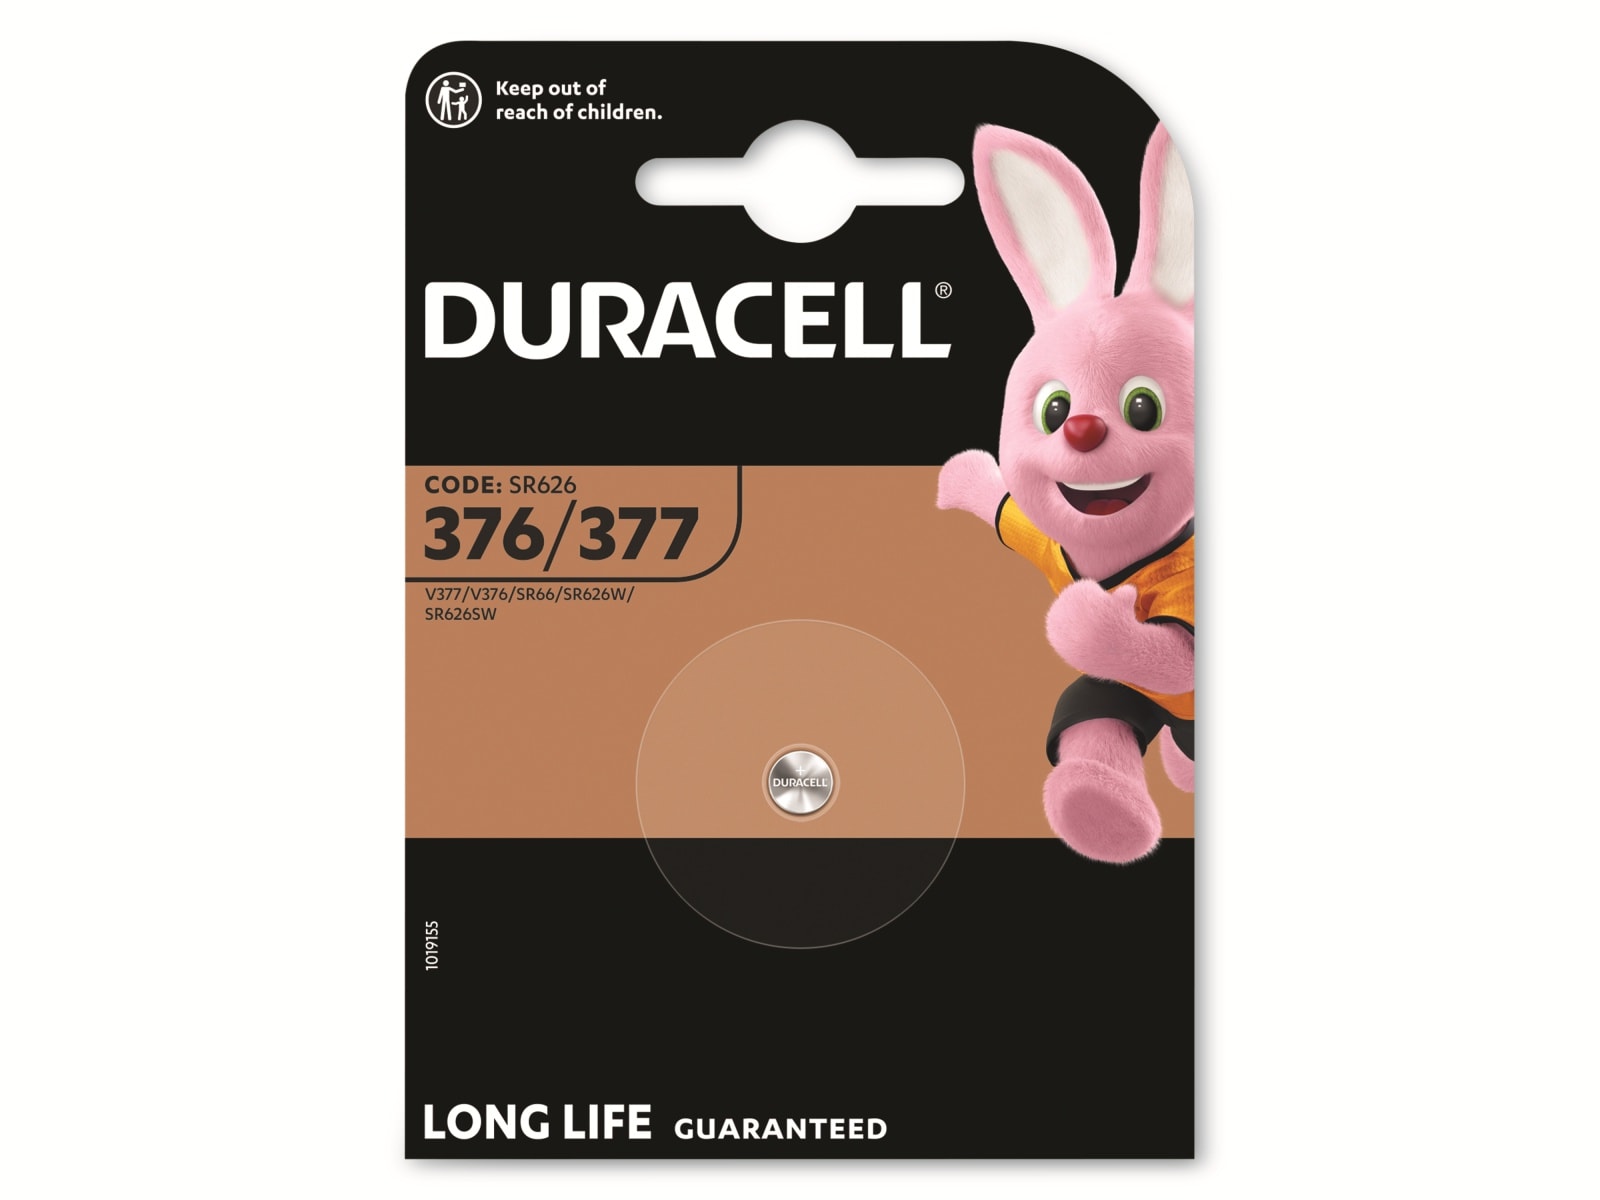 DURACELL Silver Oxide-Knopfzelle SR66, 1.5V, Watch